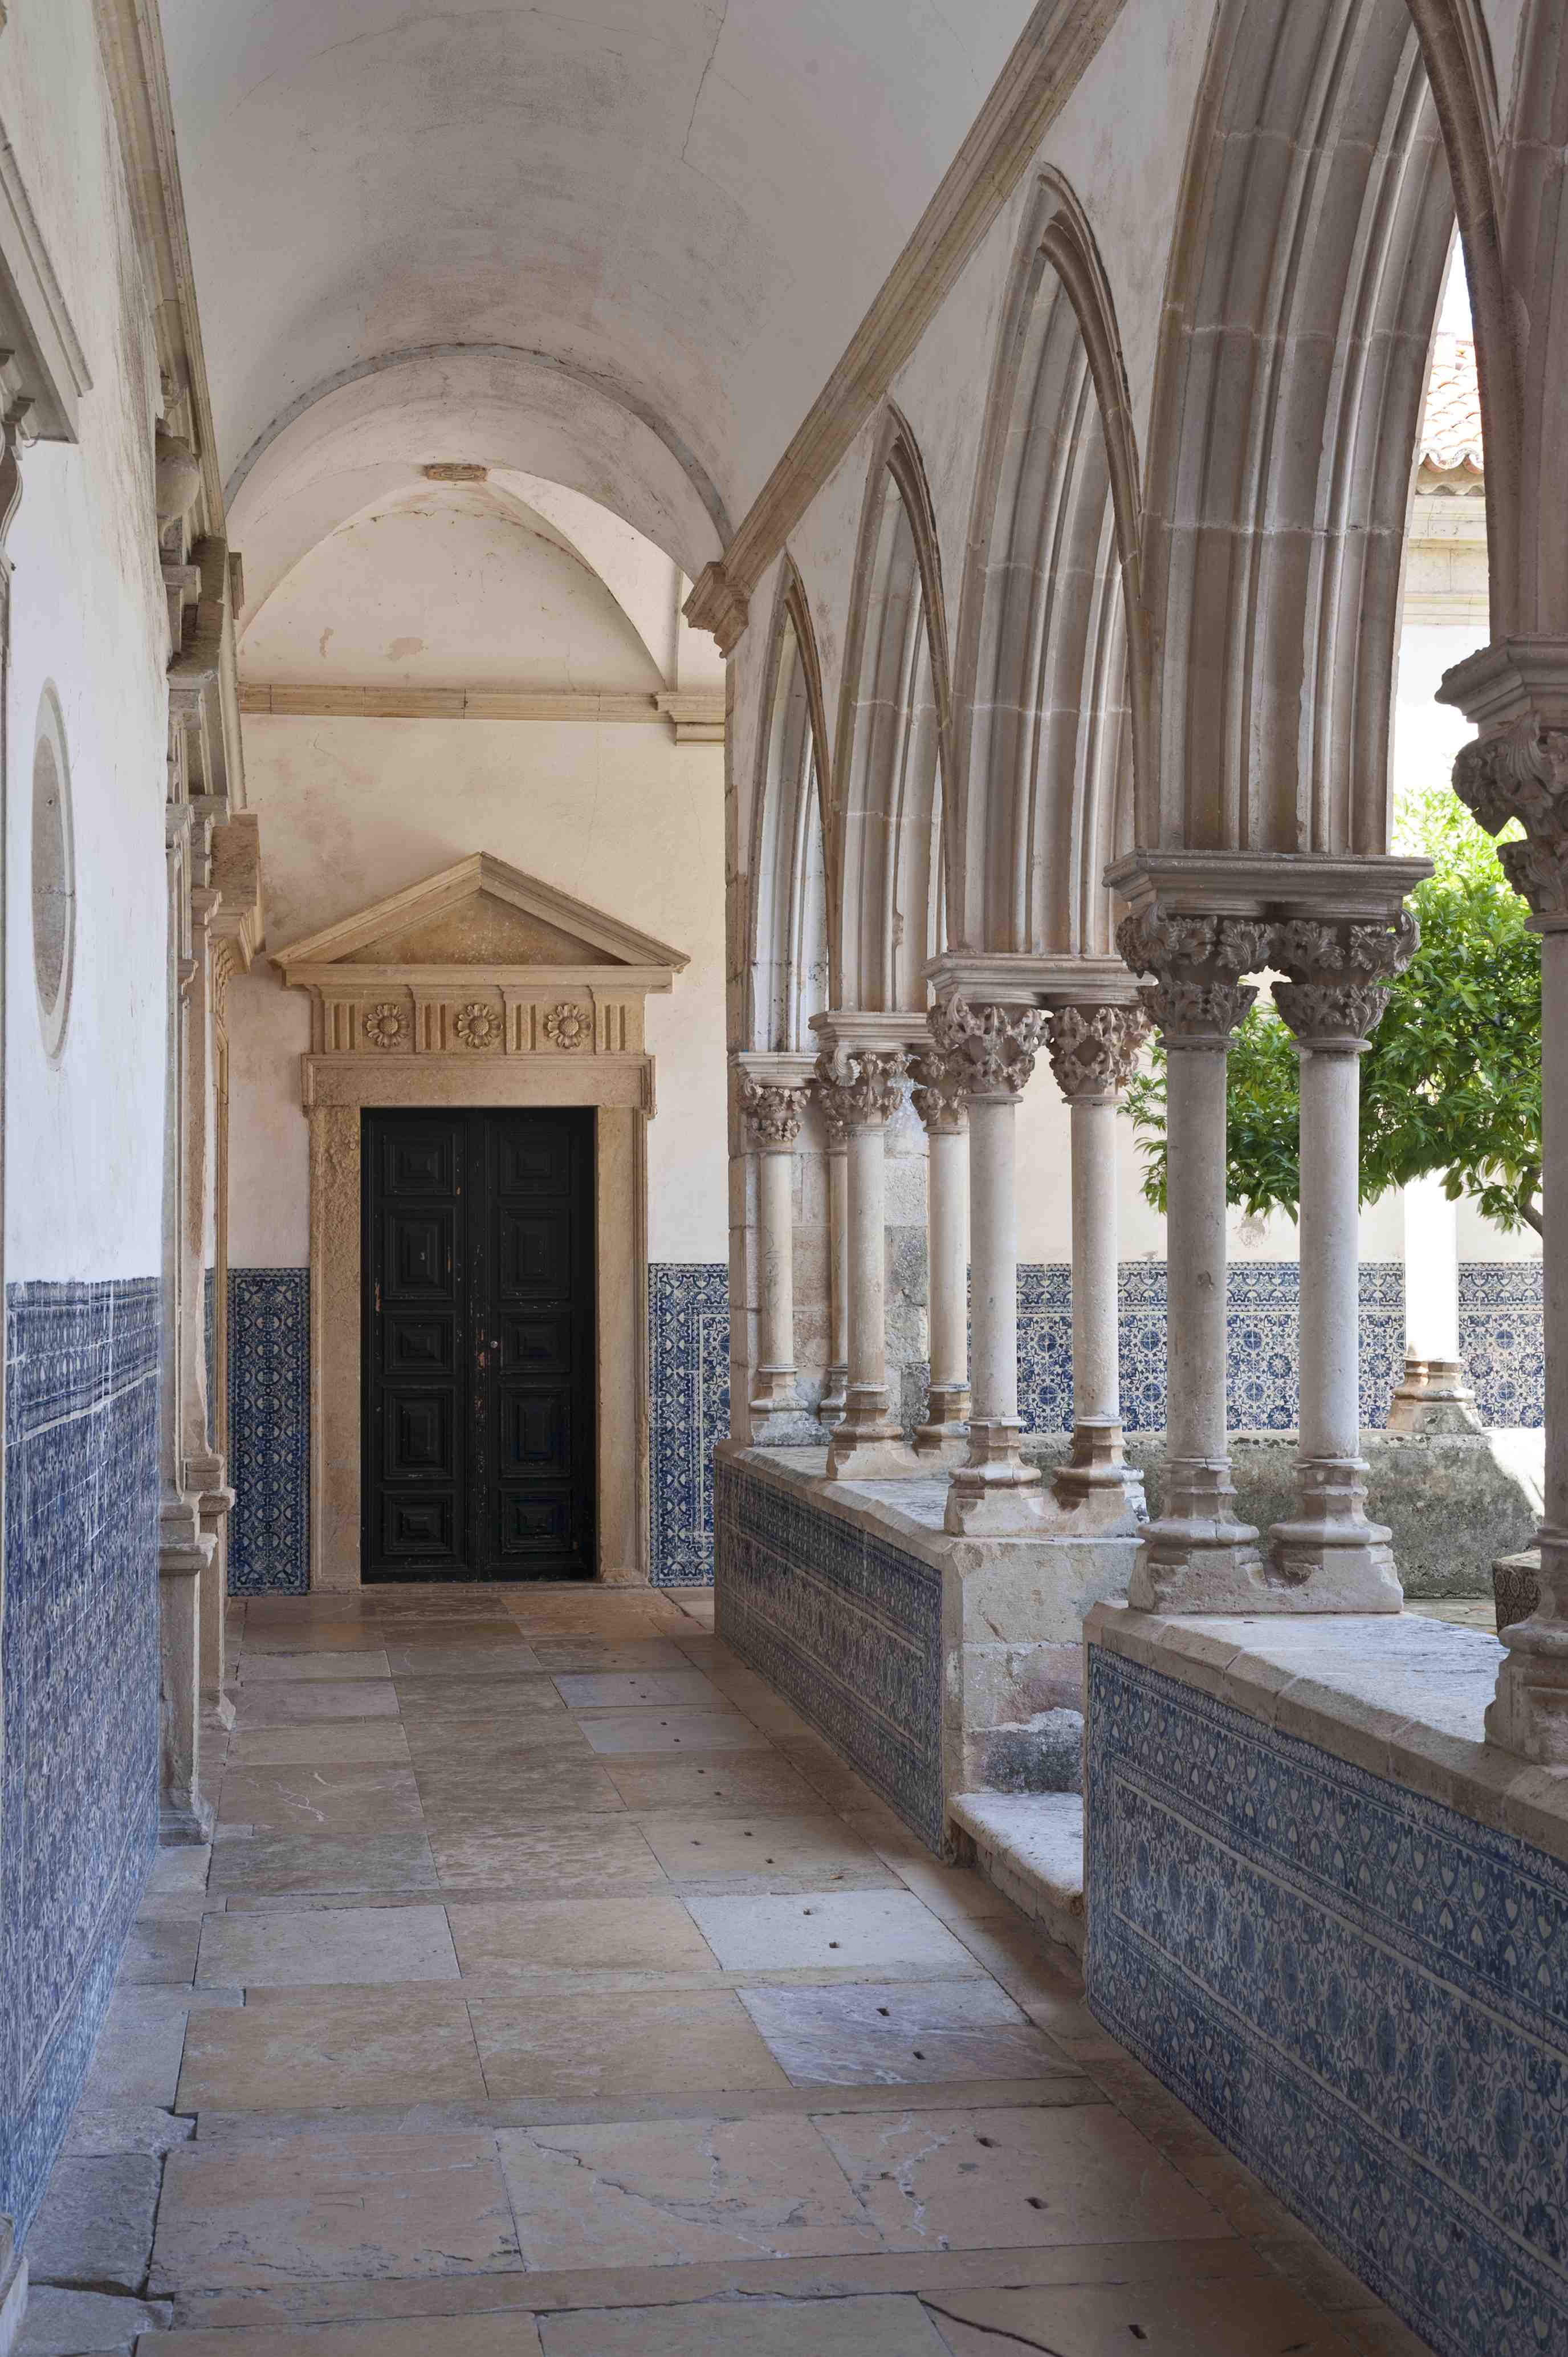 Cemetery cloister (detail of one of the links to the courtyard of Botica Convent of Christ) (fifteenth century)